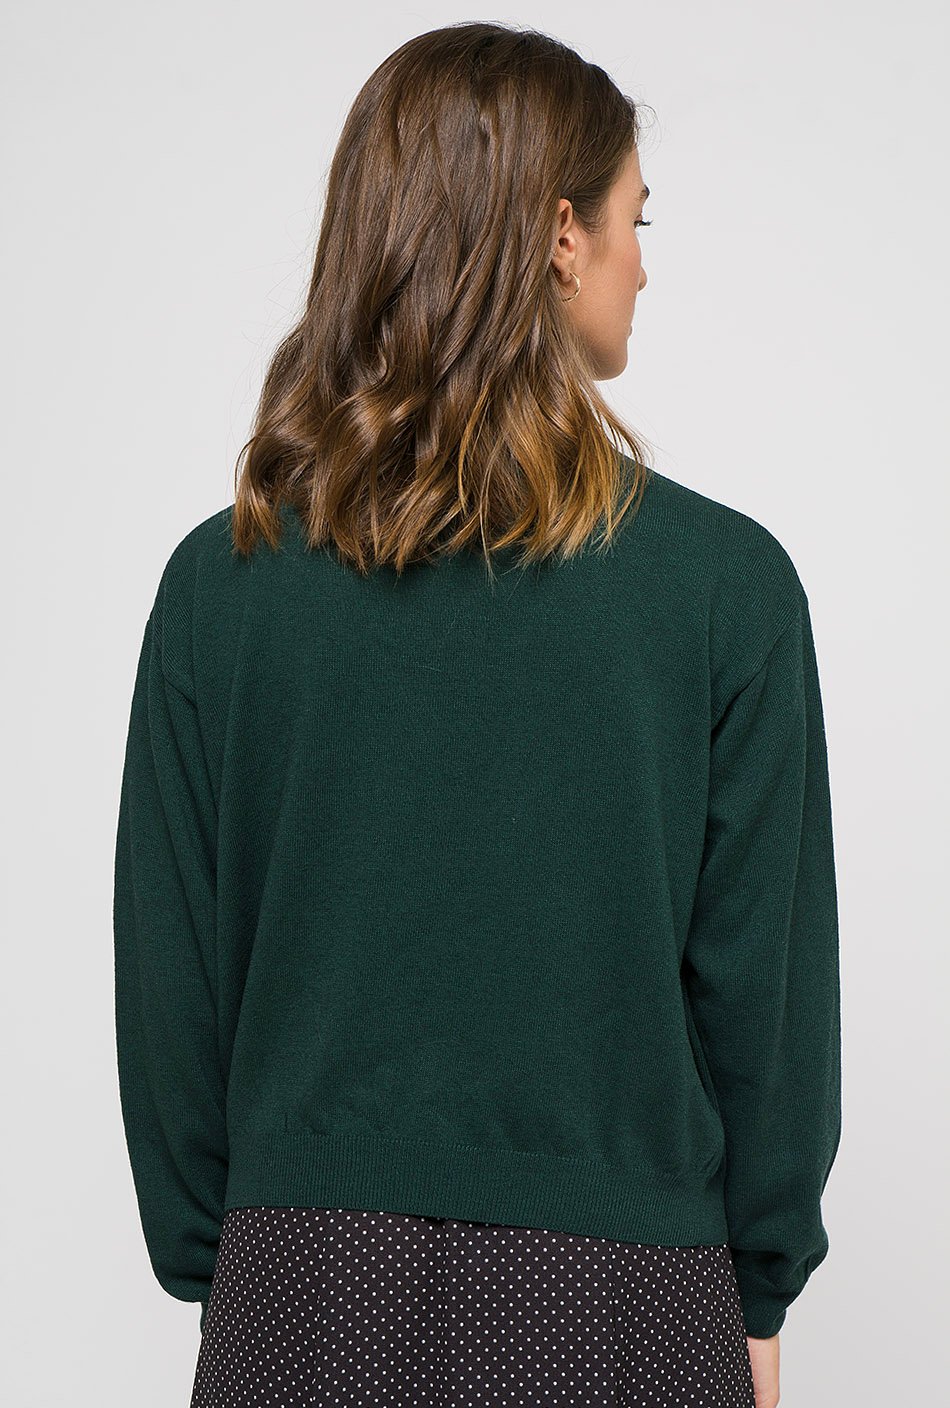 Perkins Soft Jade Knitted Sweater